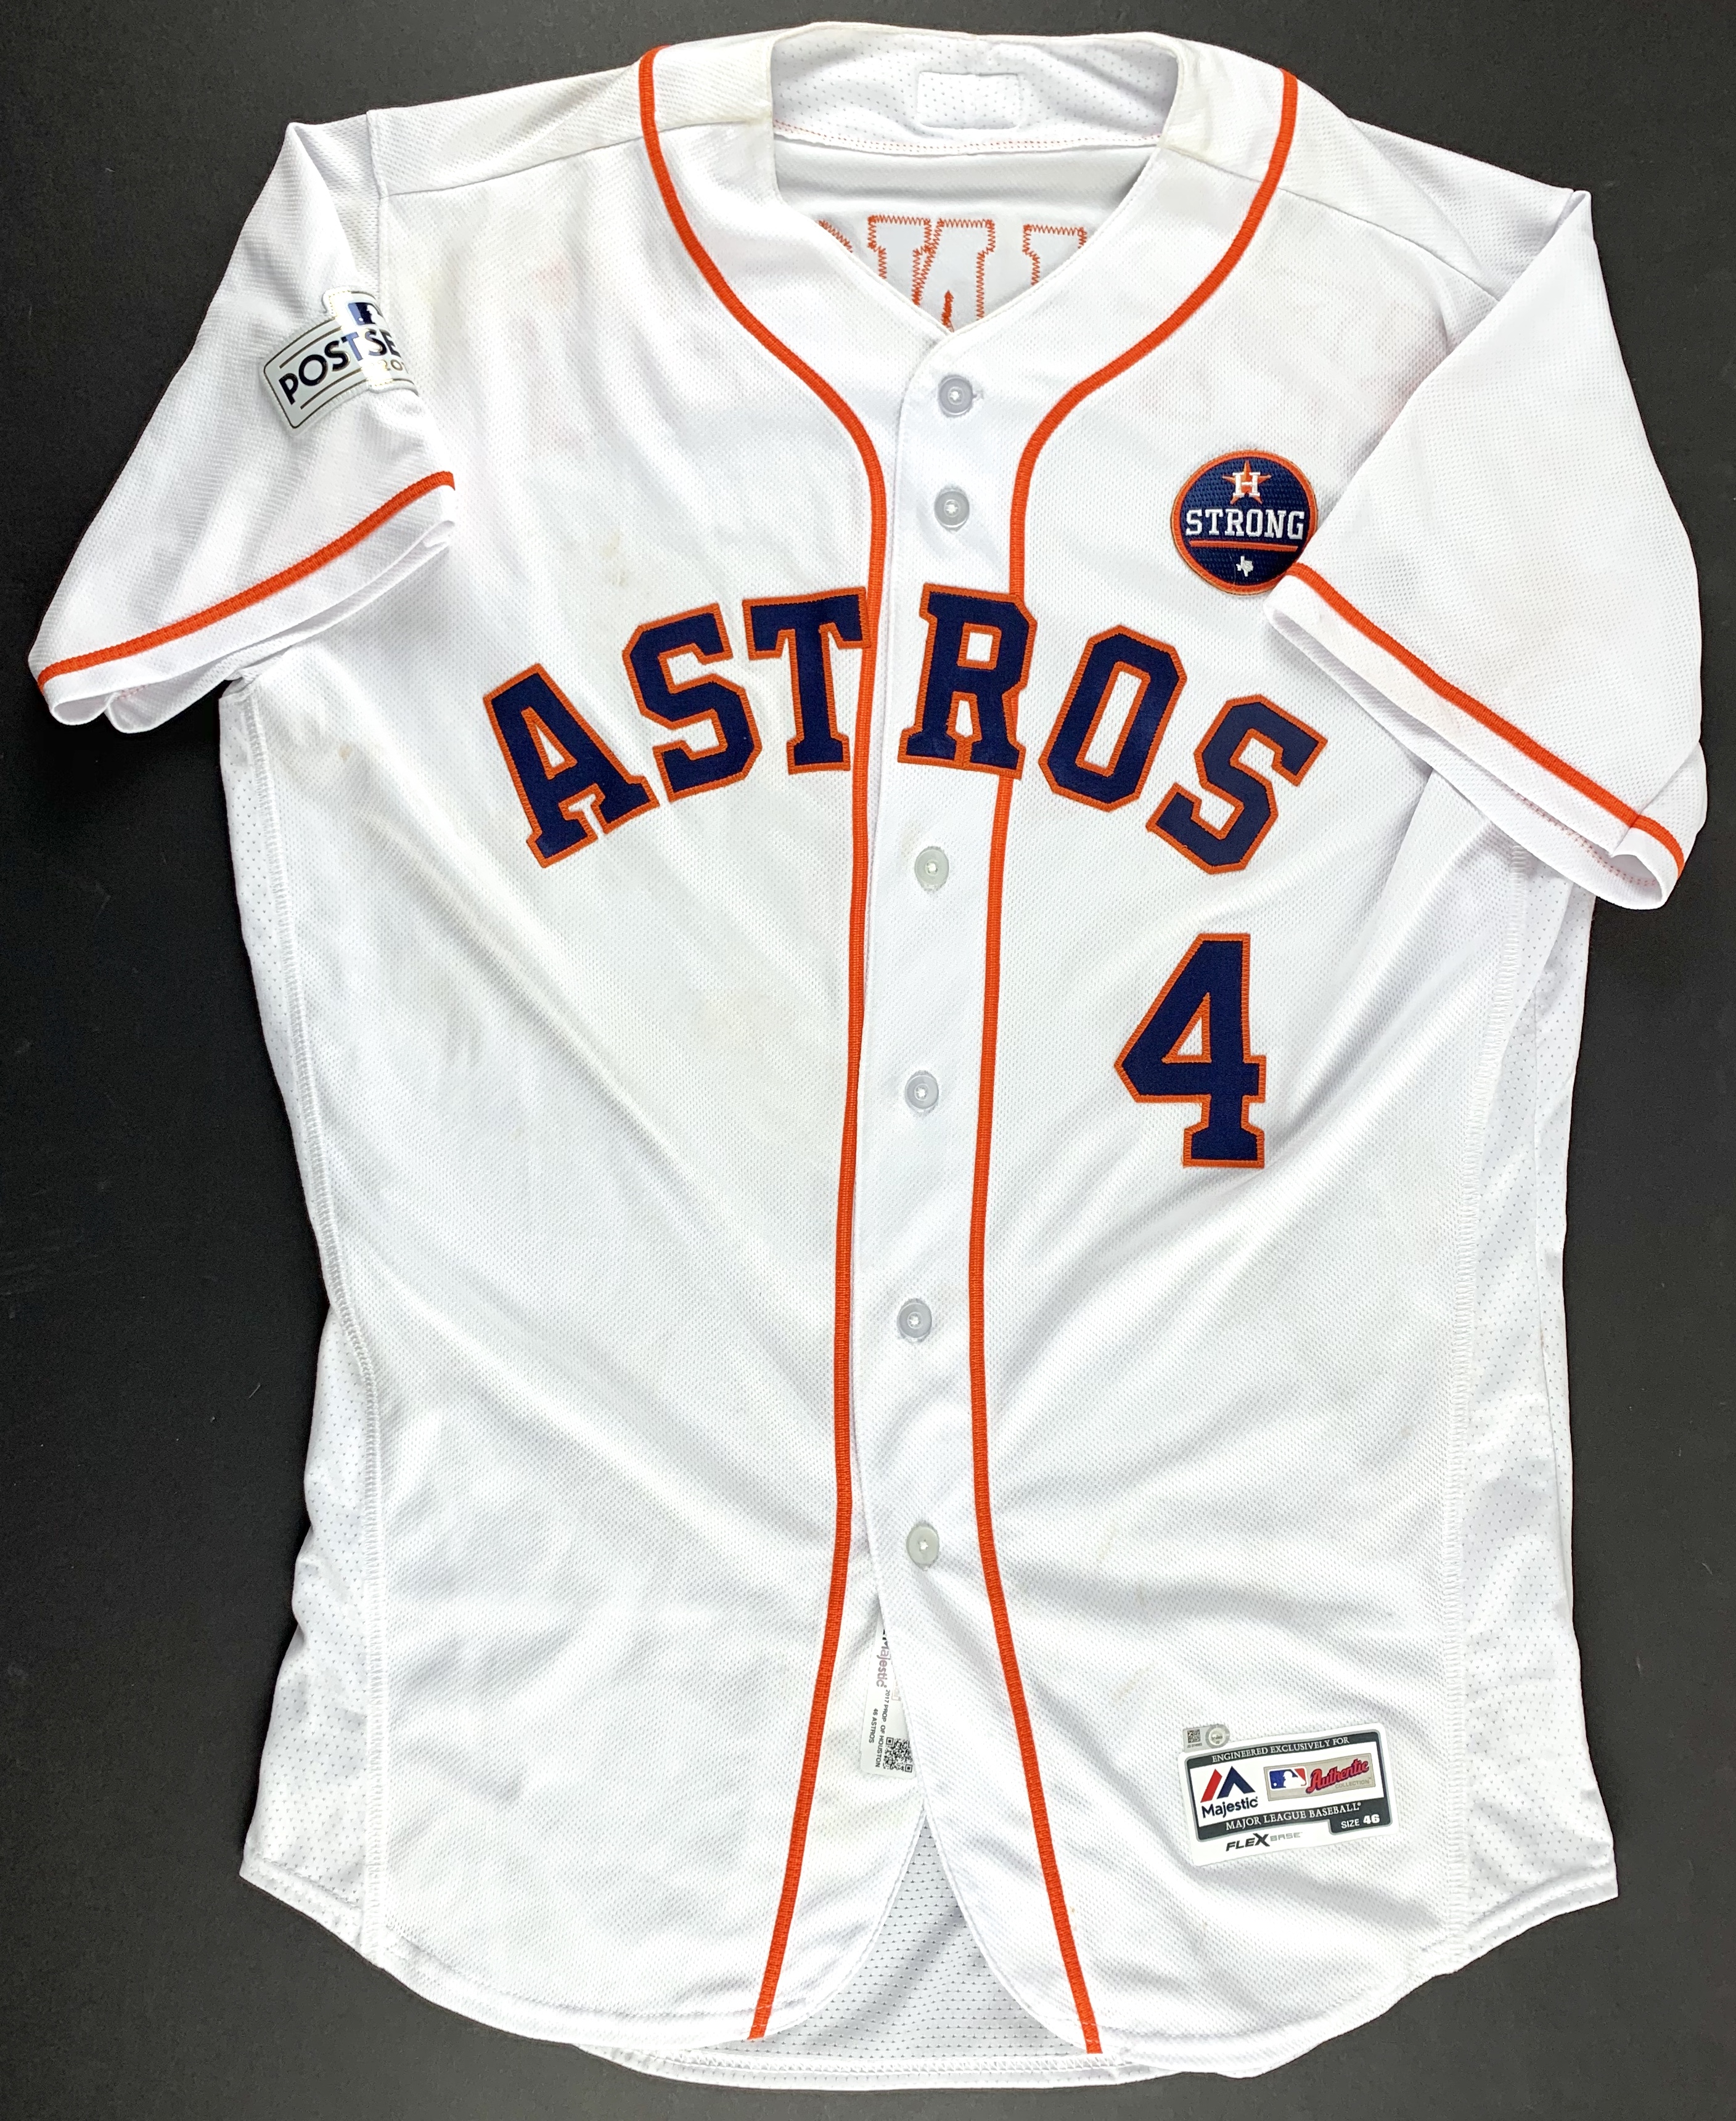 Astros #4 George Springer 2017 World Series Campions Jersey Size